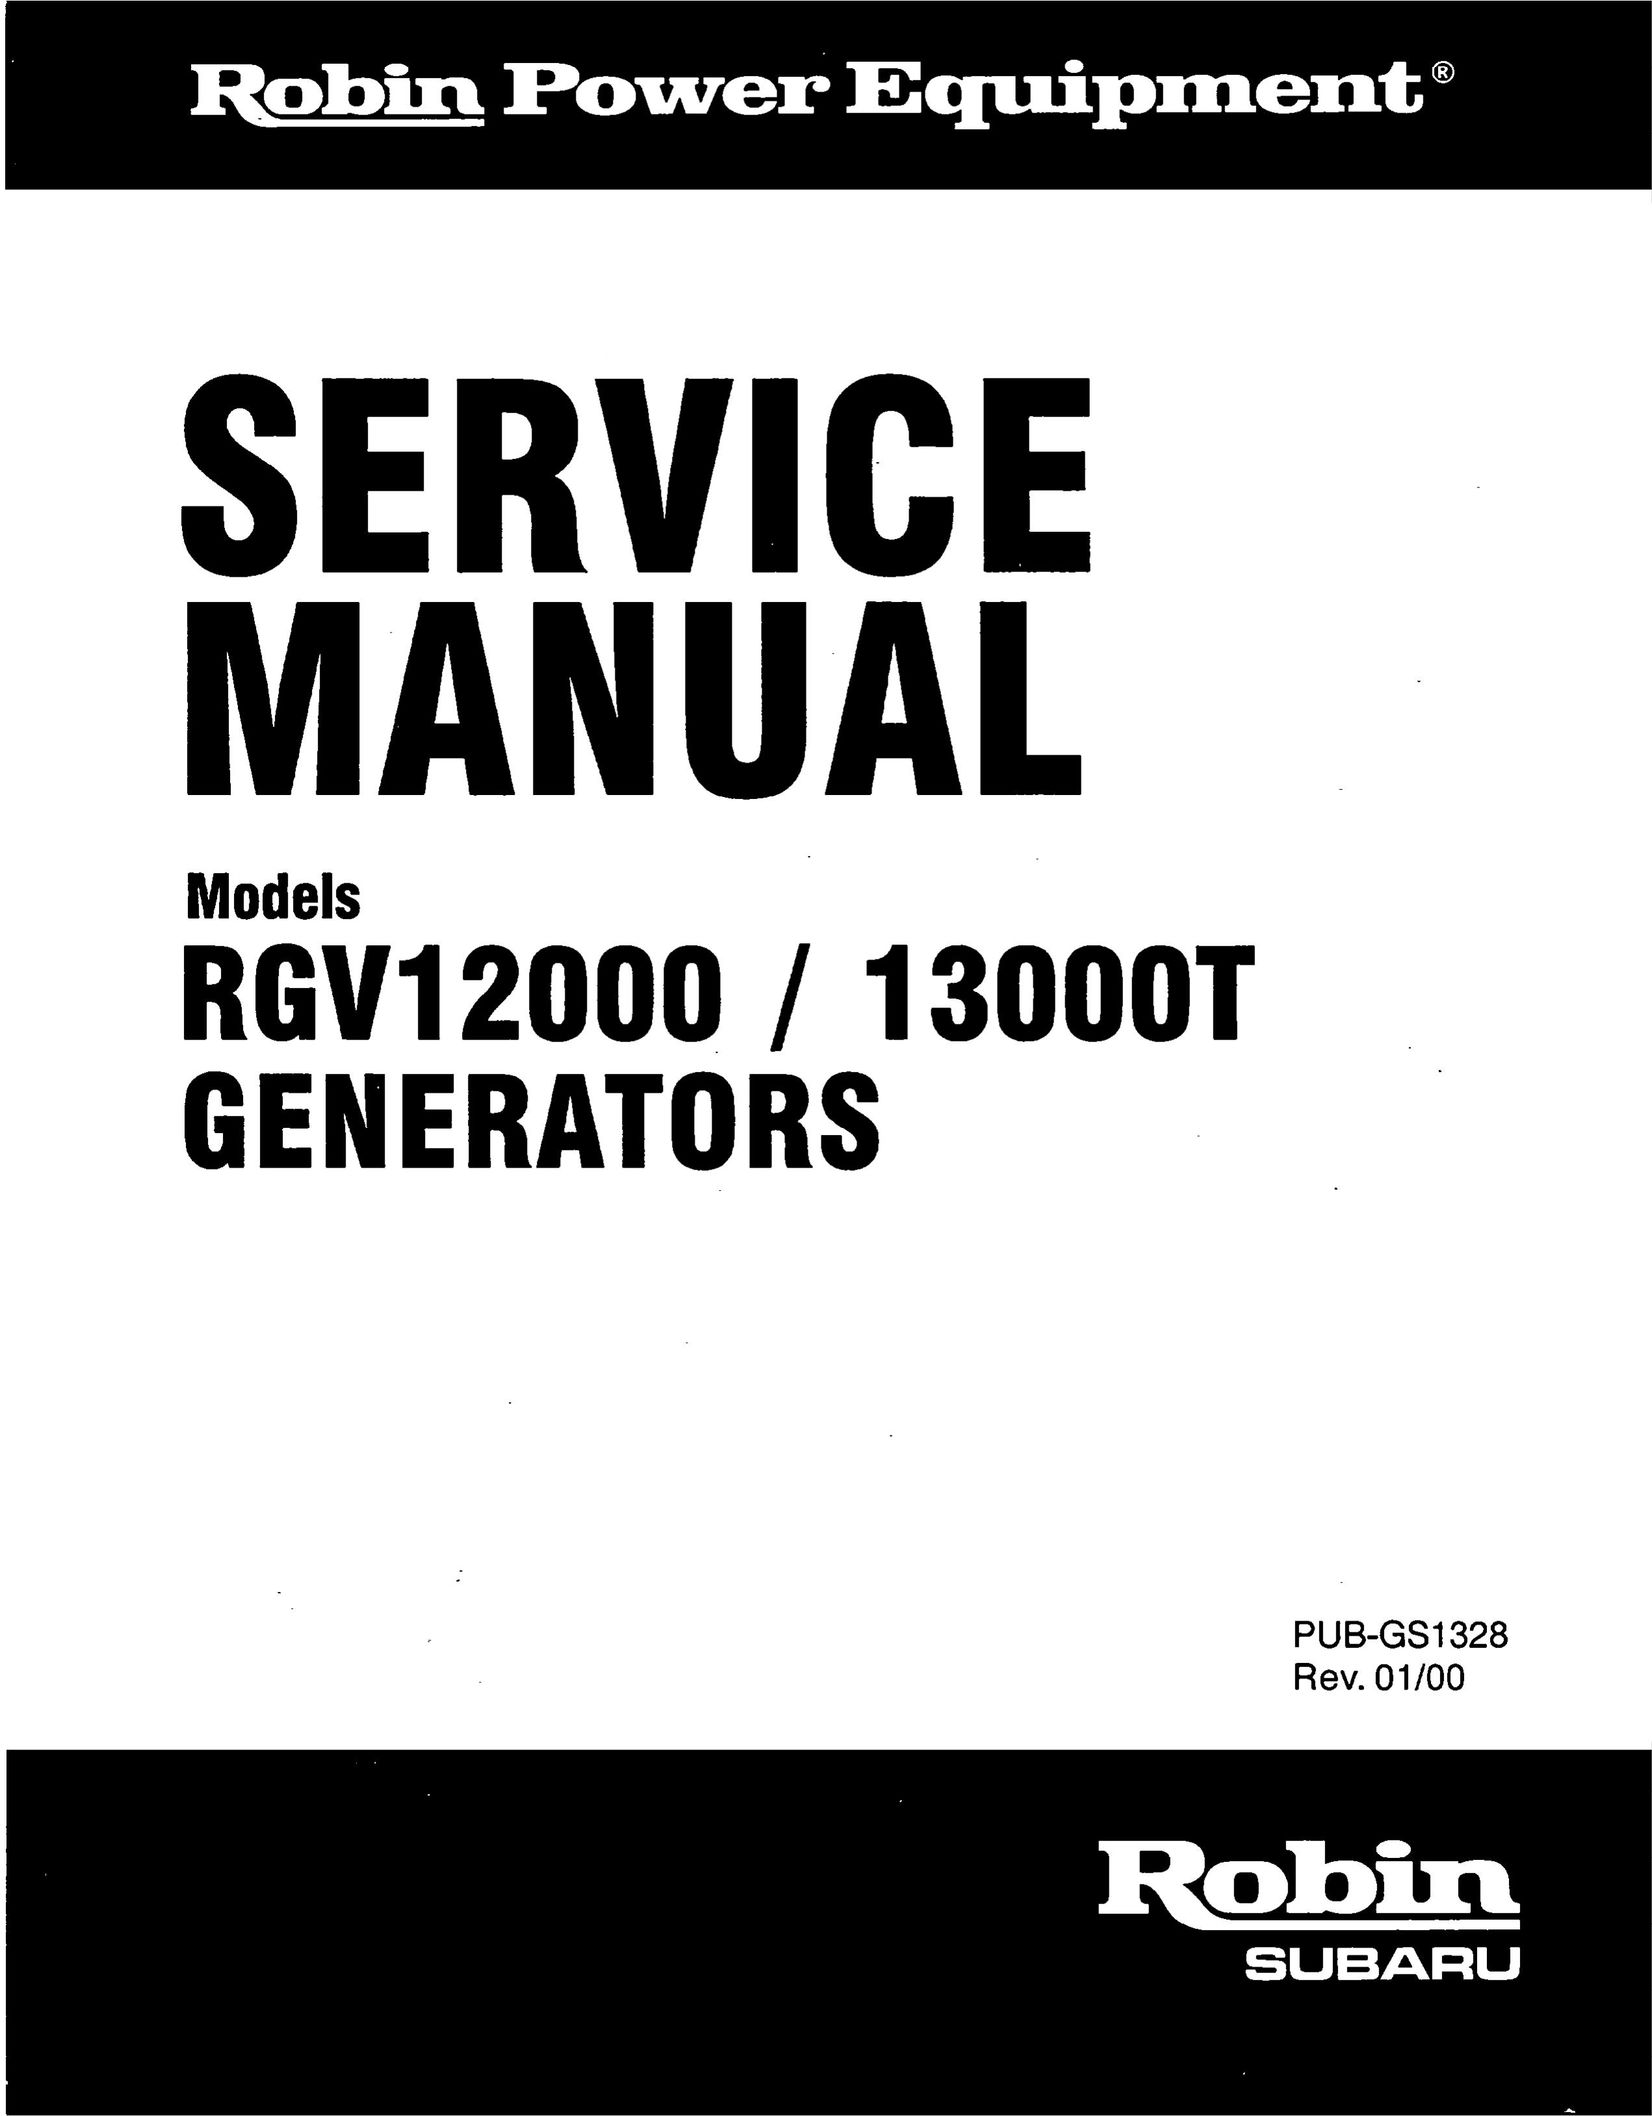 Subaru Robin Power Products 13OOOT Cassette Player User Manual